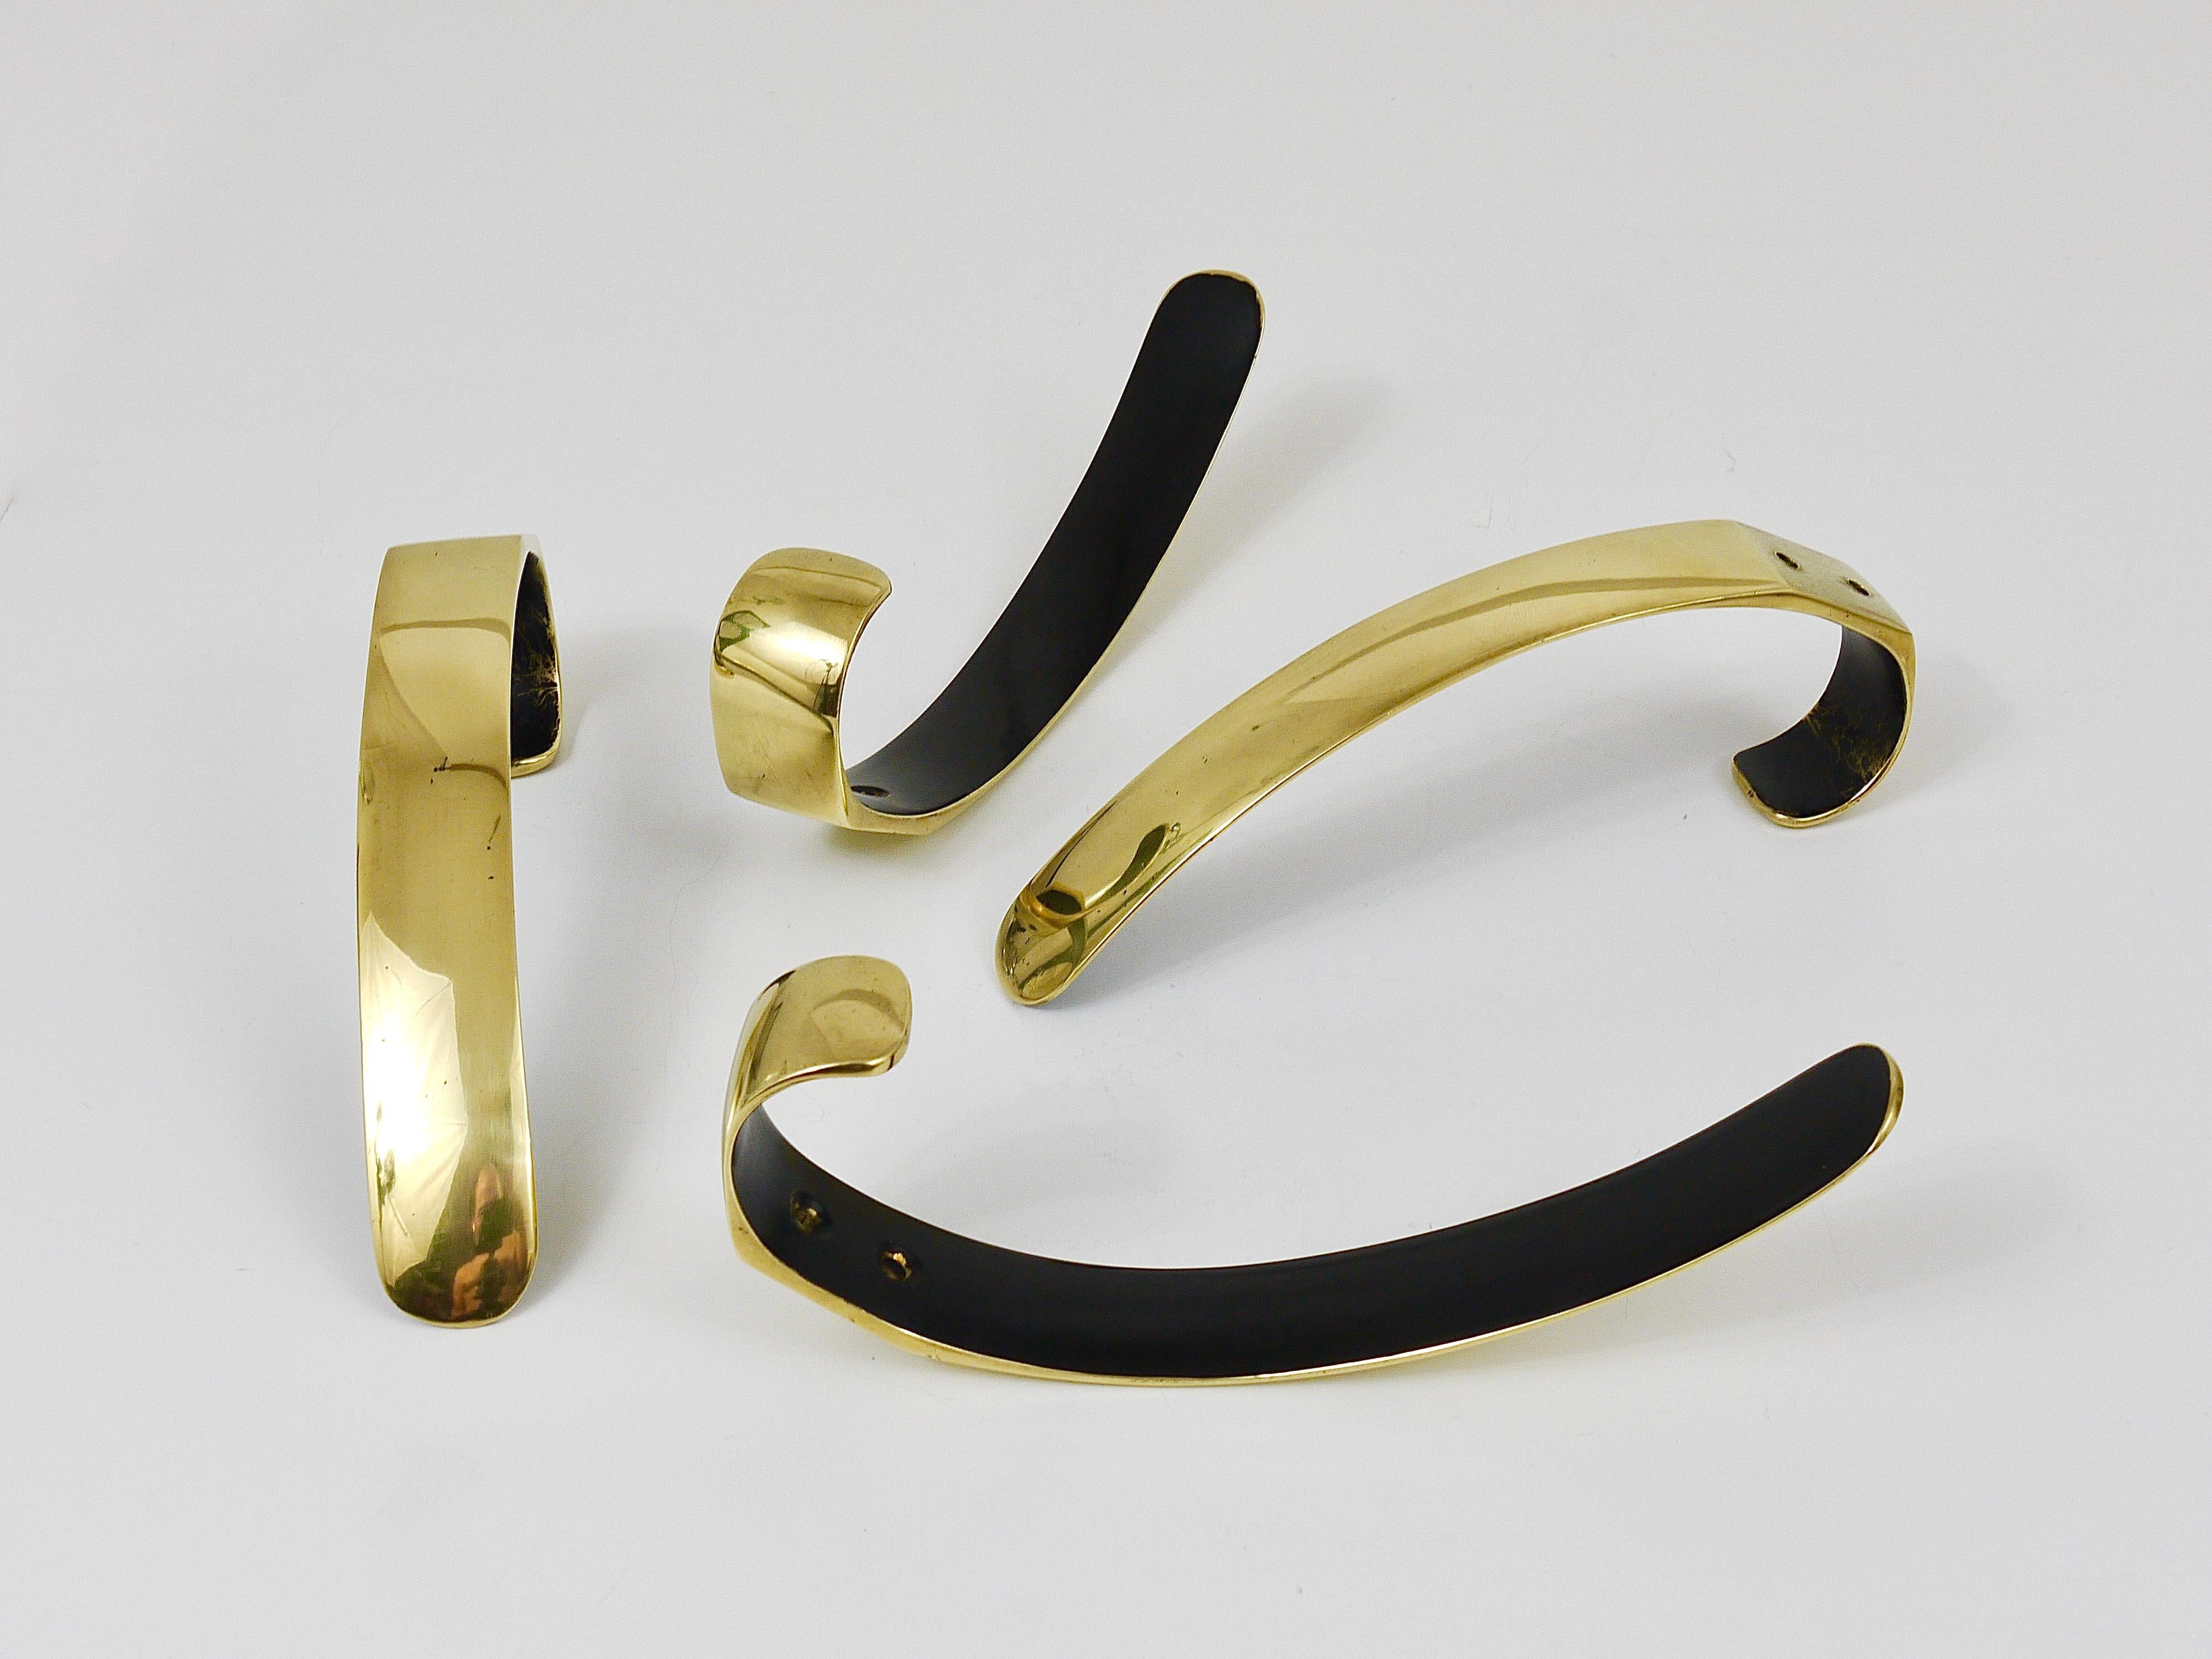 Austrian Up to Six Mid-Century Brass Wall Coat Hooks by Herta Baller, Austria, 1950s For Sale